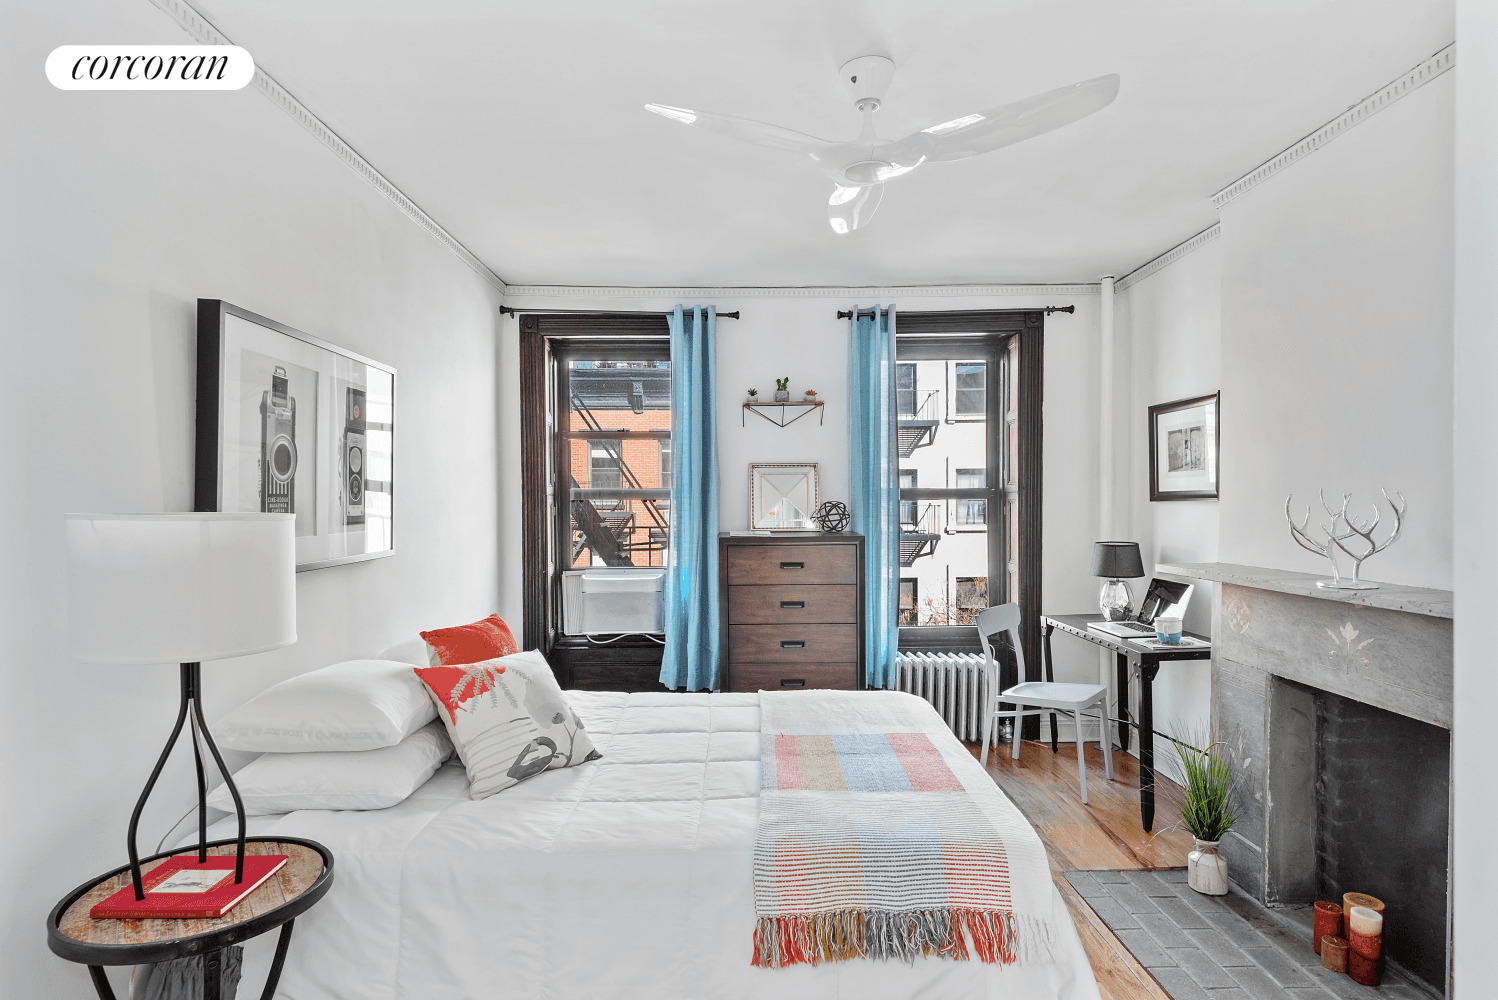 Welcome home to this light and airy railroad style 1BR, located on one of the most desirable tree lined streets in Chelsea.